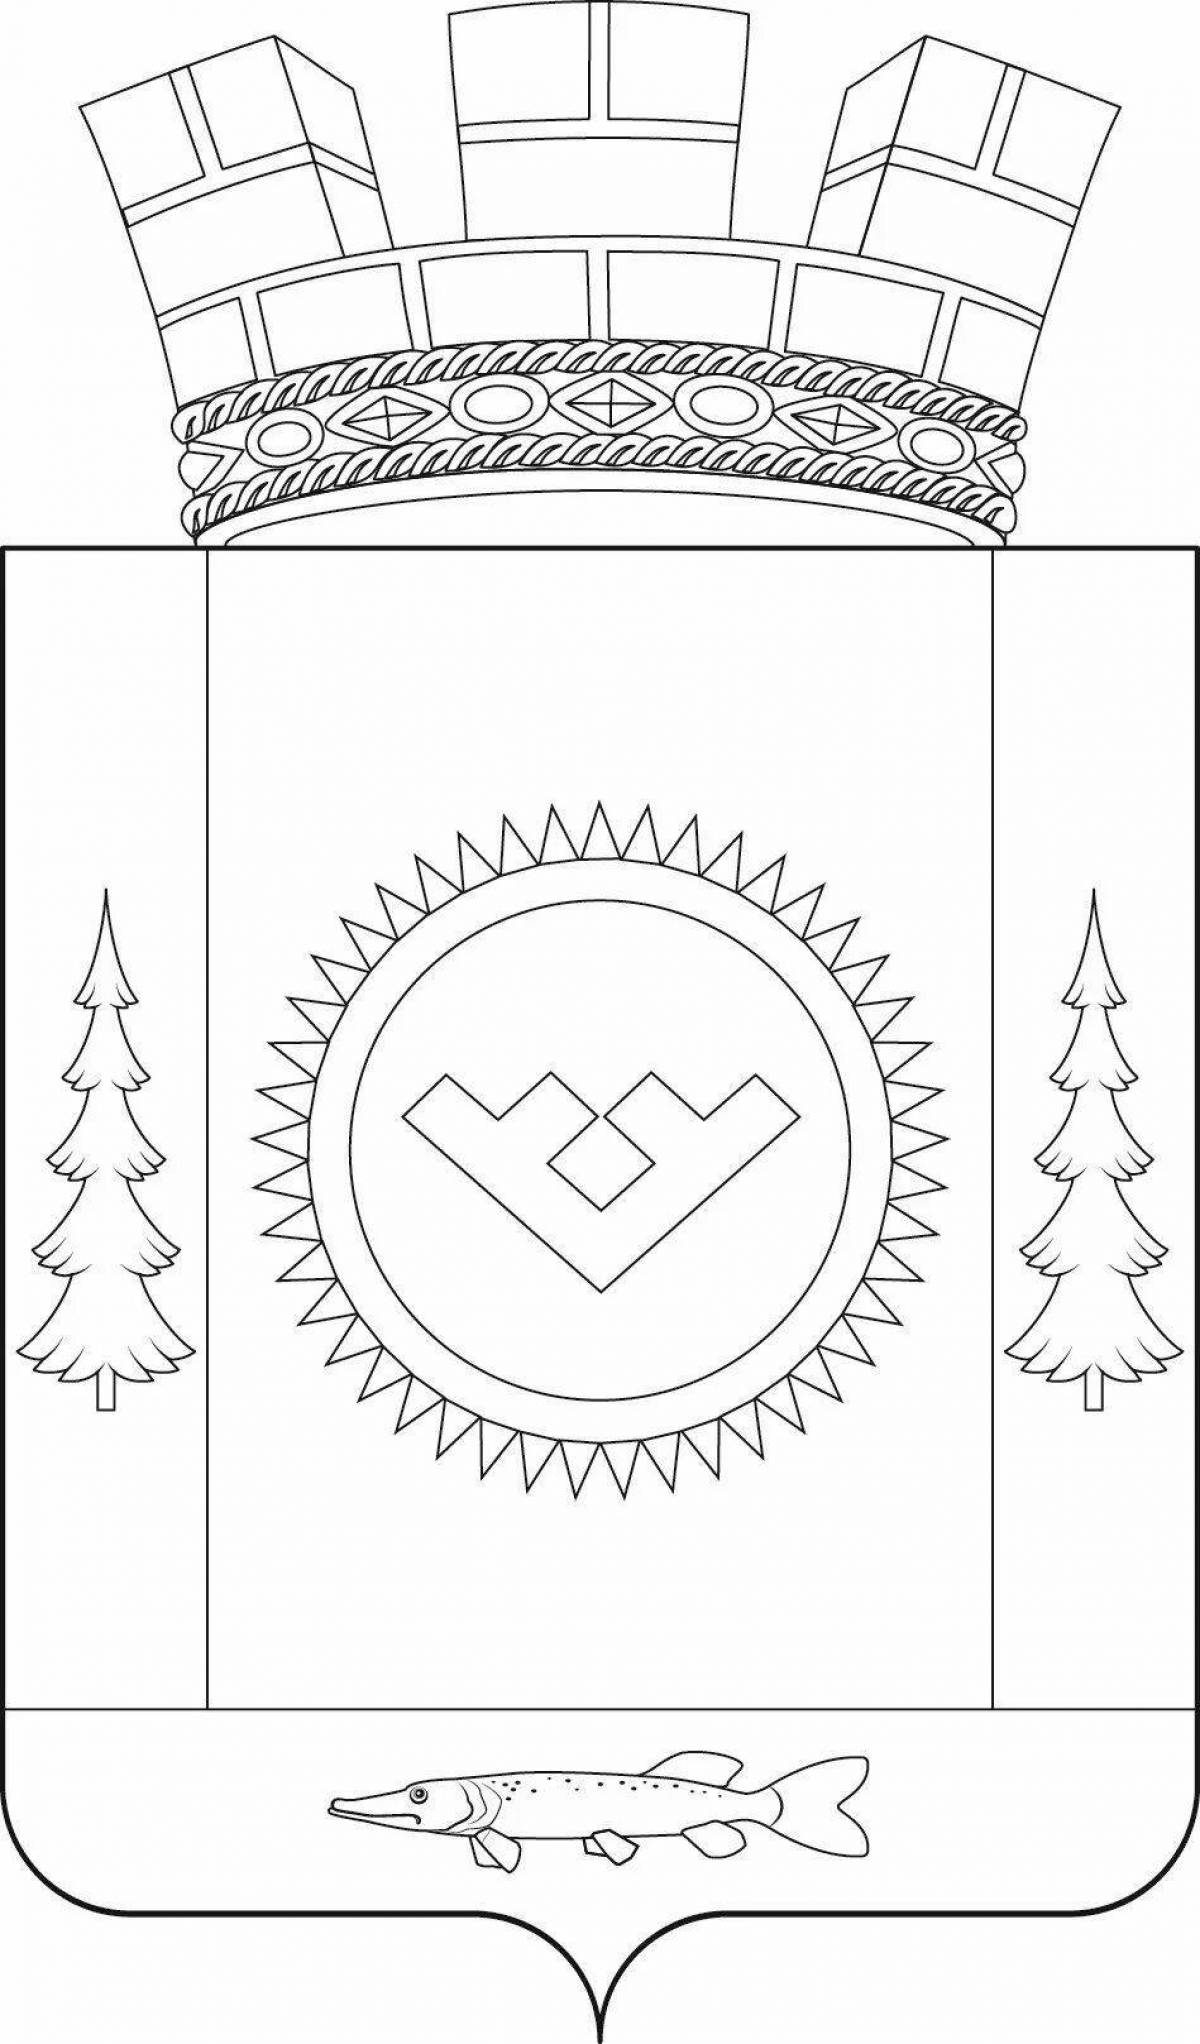 Cheerful coat of arms coloring for children